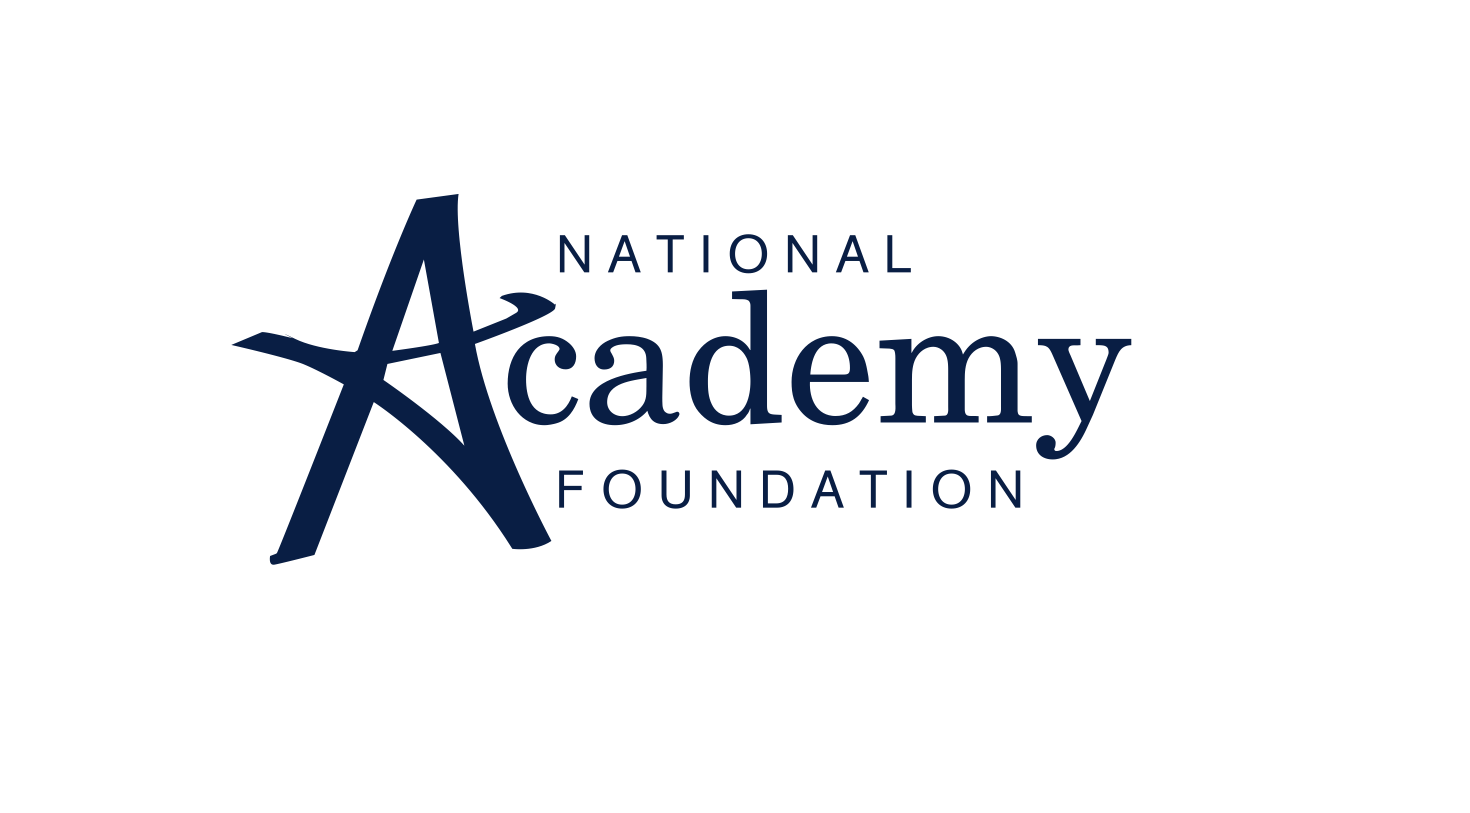 CONTEXT THE NATIONAL ACADEMY FOUNDATION (NAF) IS AN ACCLAIMED